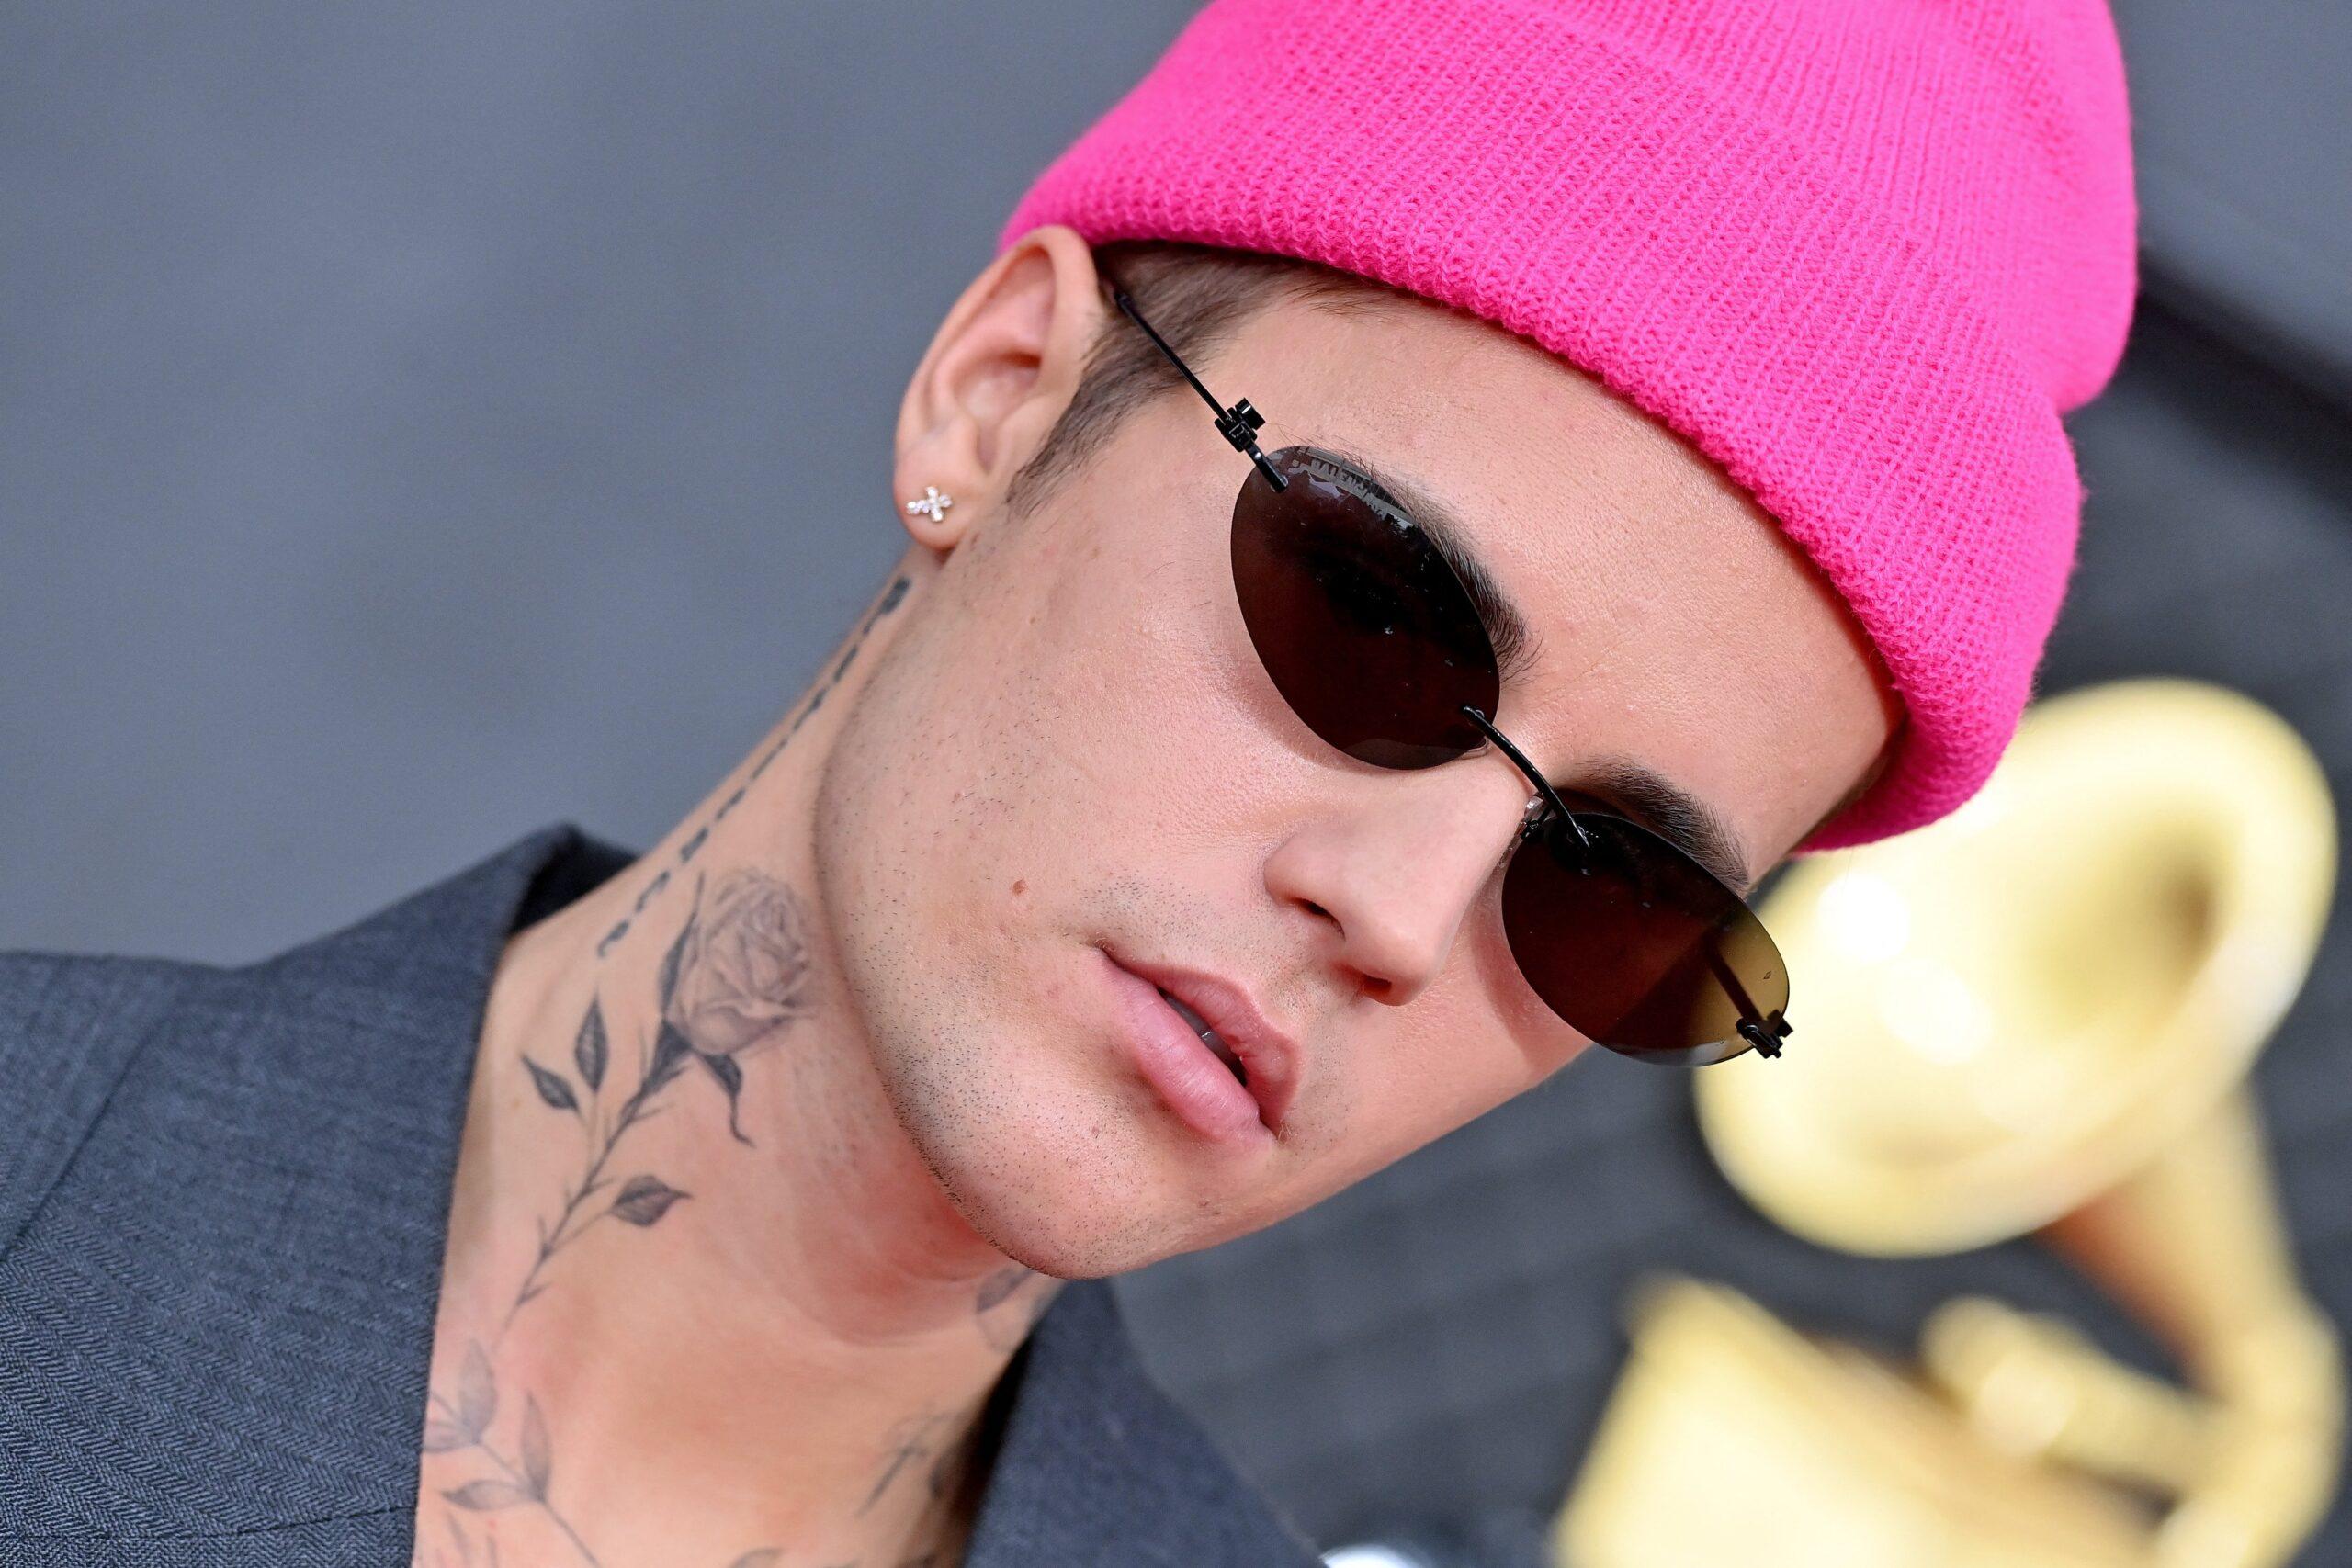 Justin Bieber's Alleged Super Bowl Arrival Hints At Halftime Show Appearance